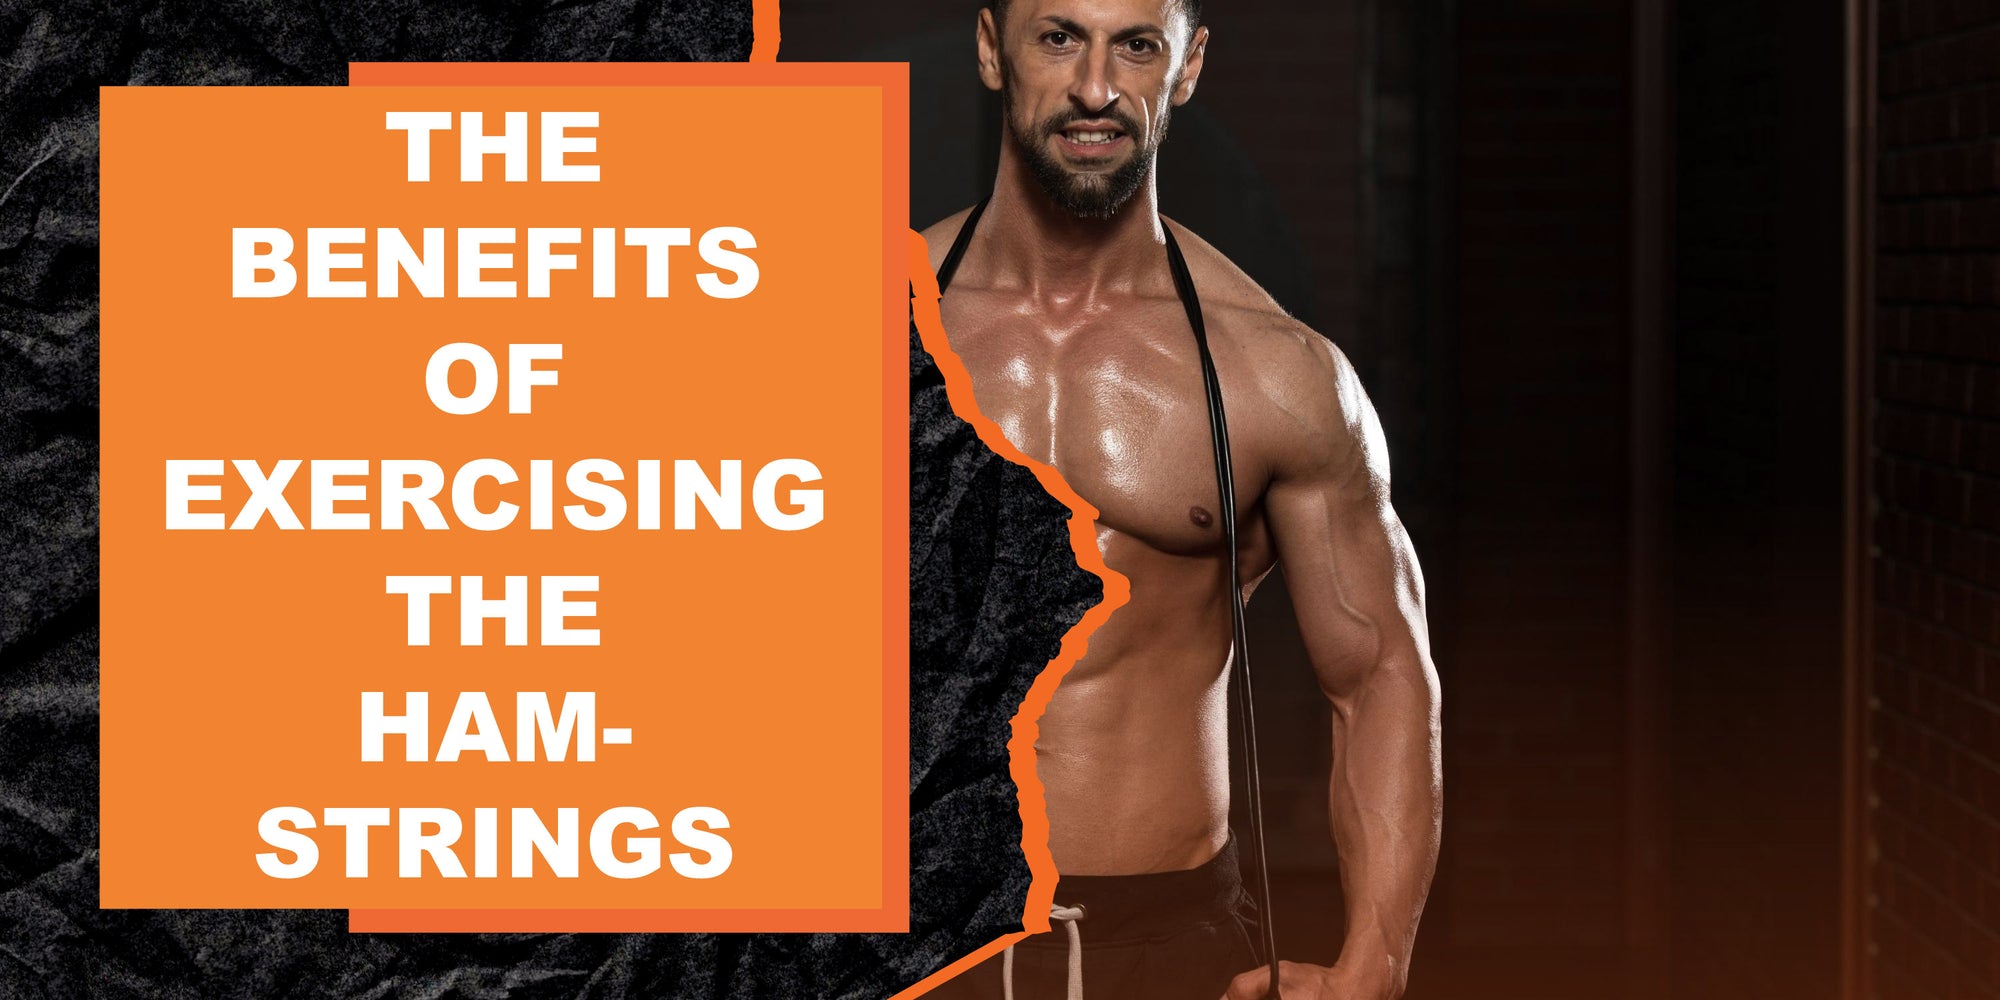 The Benefits of Exercising the Hamstrings